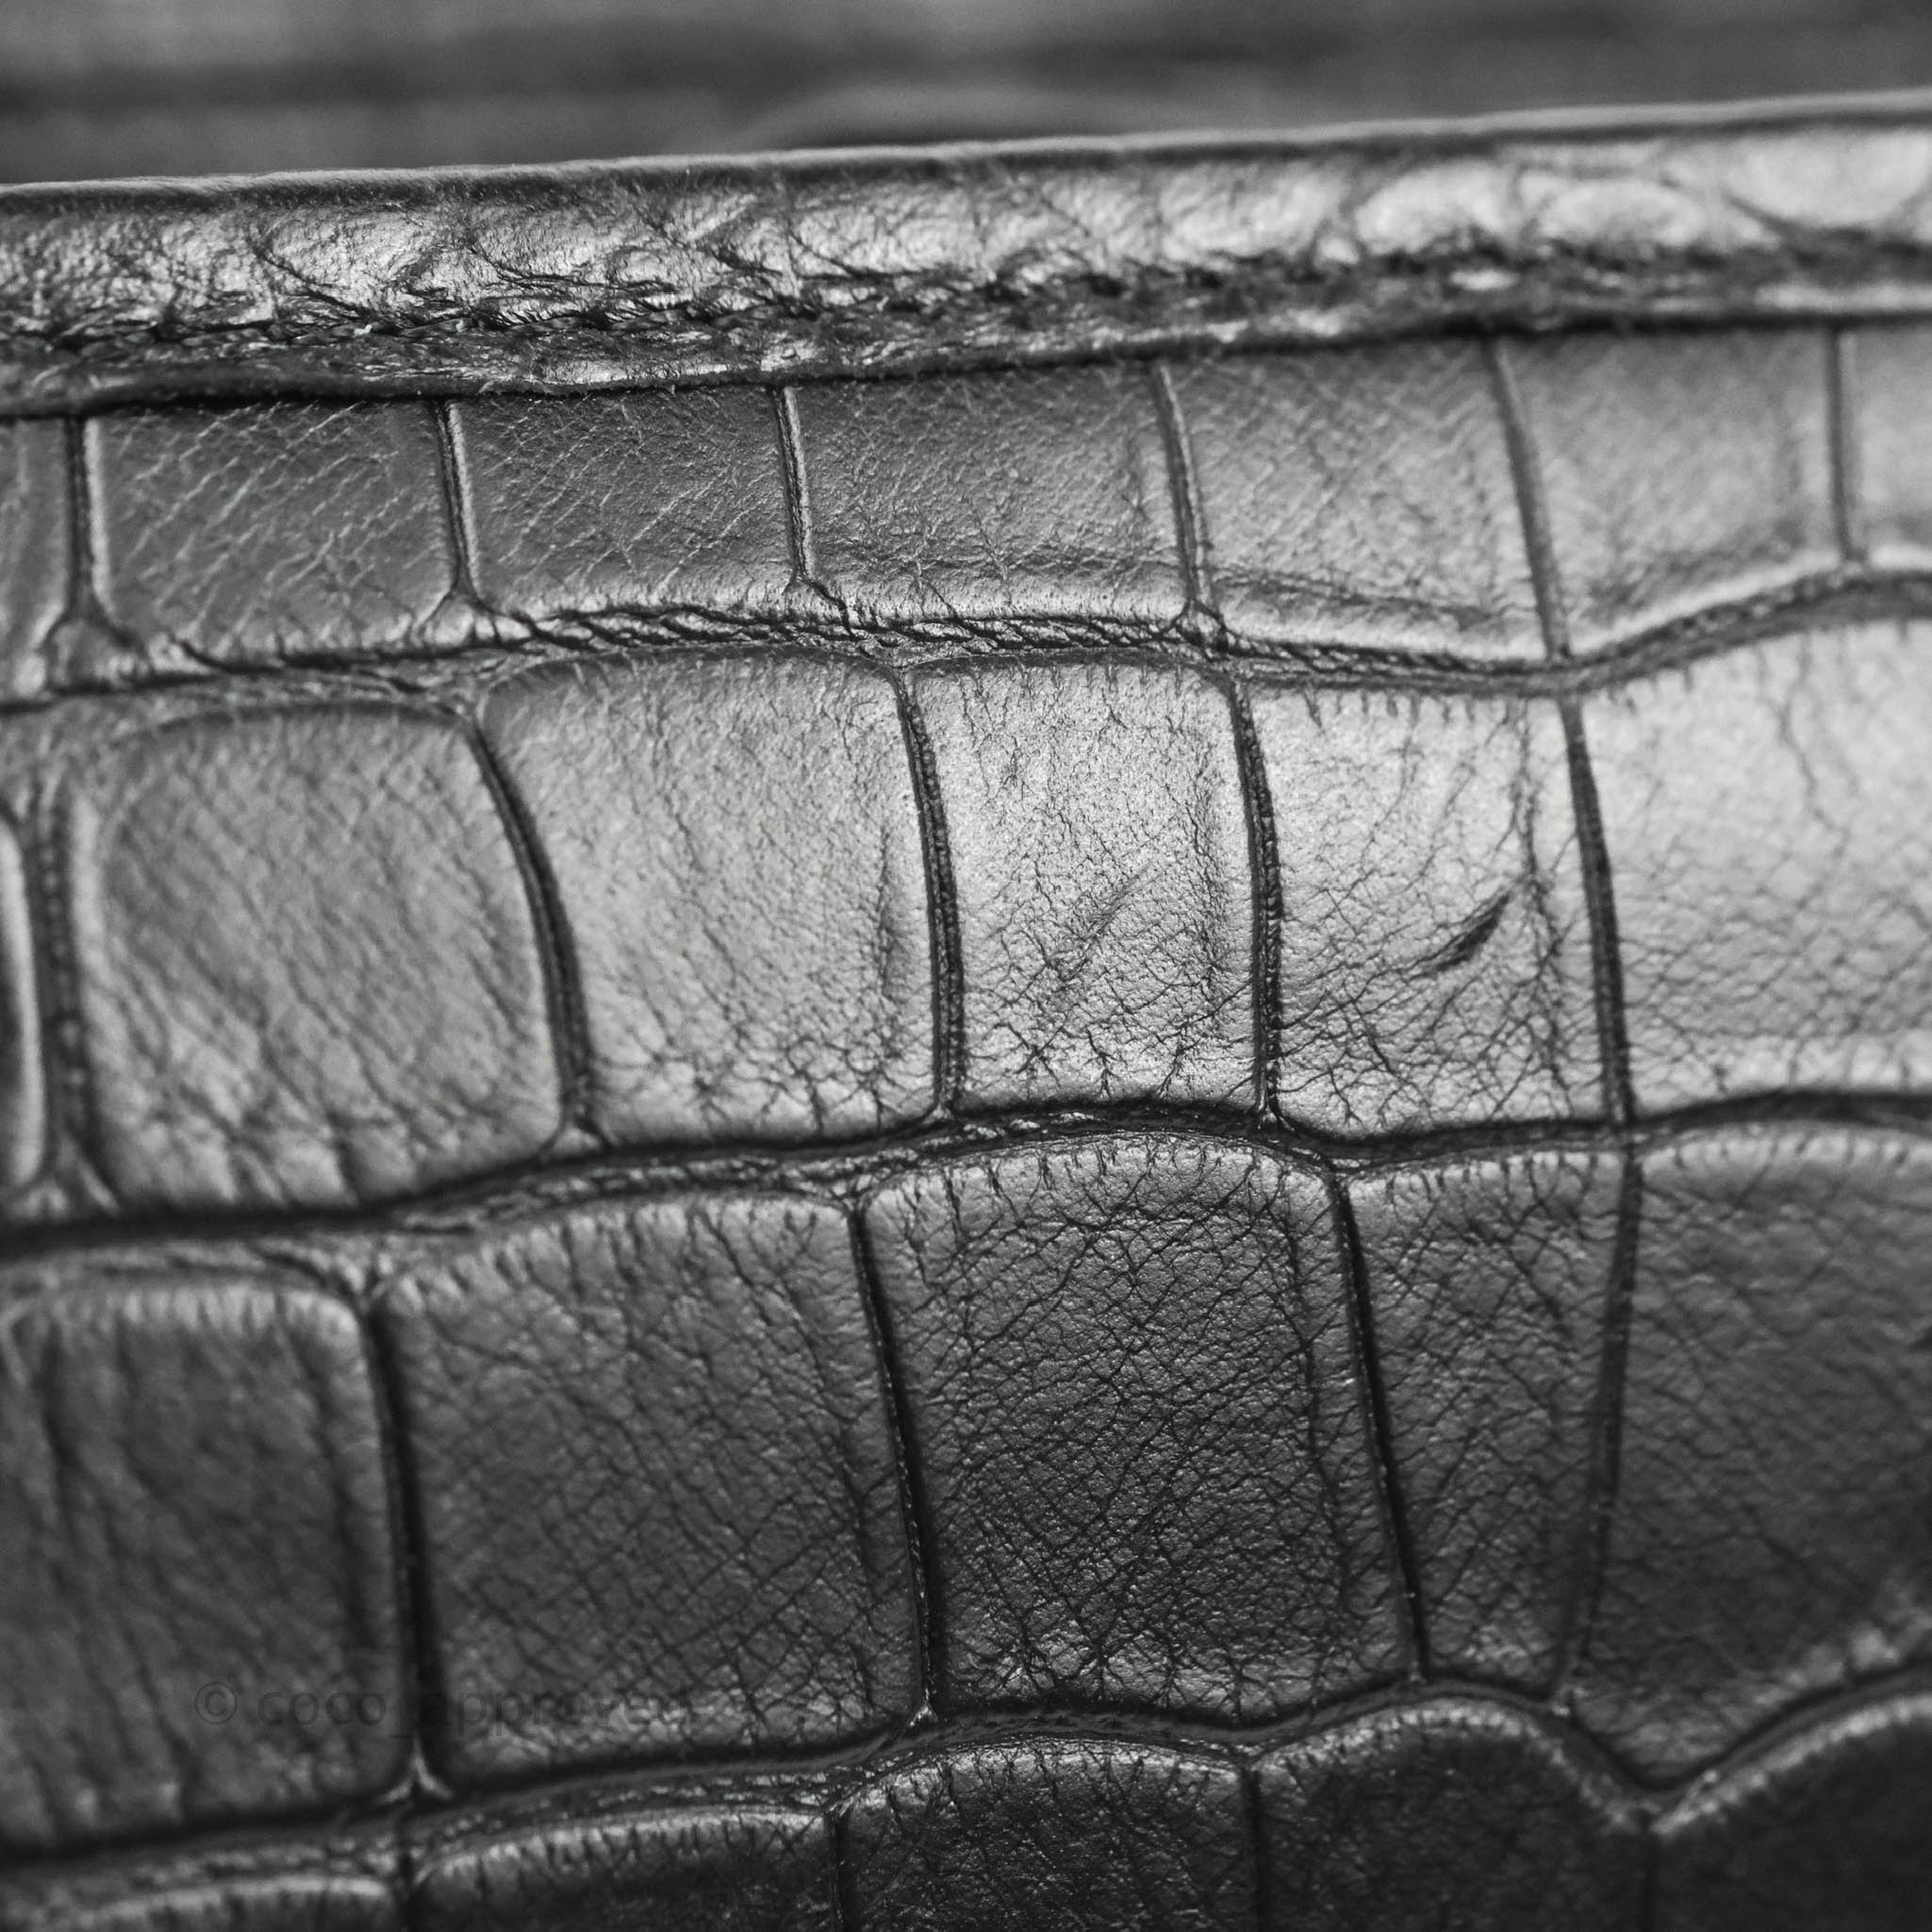 Chanel Croc-Embossed Gabrielle Clutch With Logo Strap – Luxury